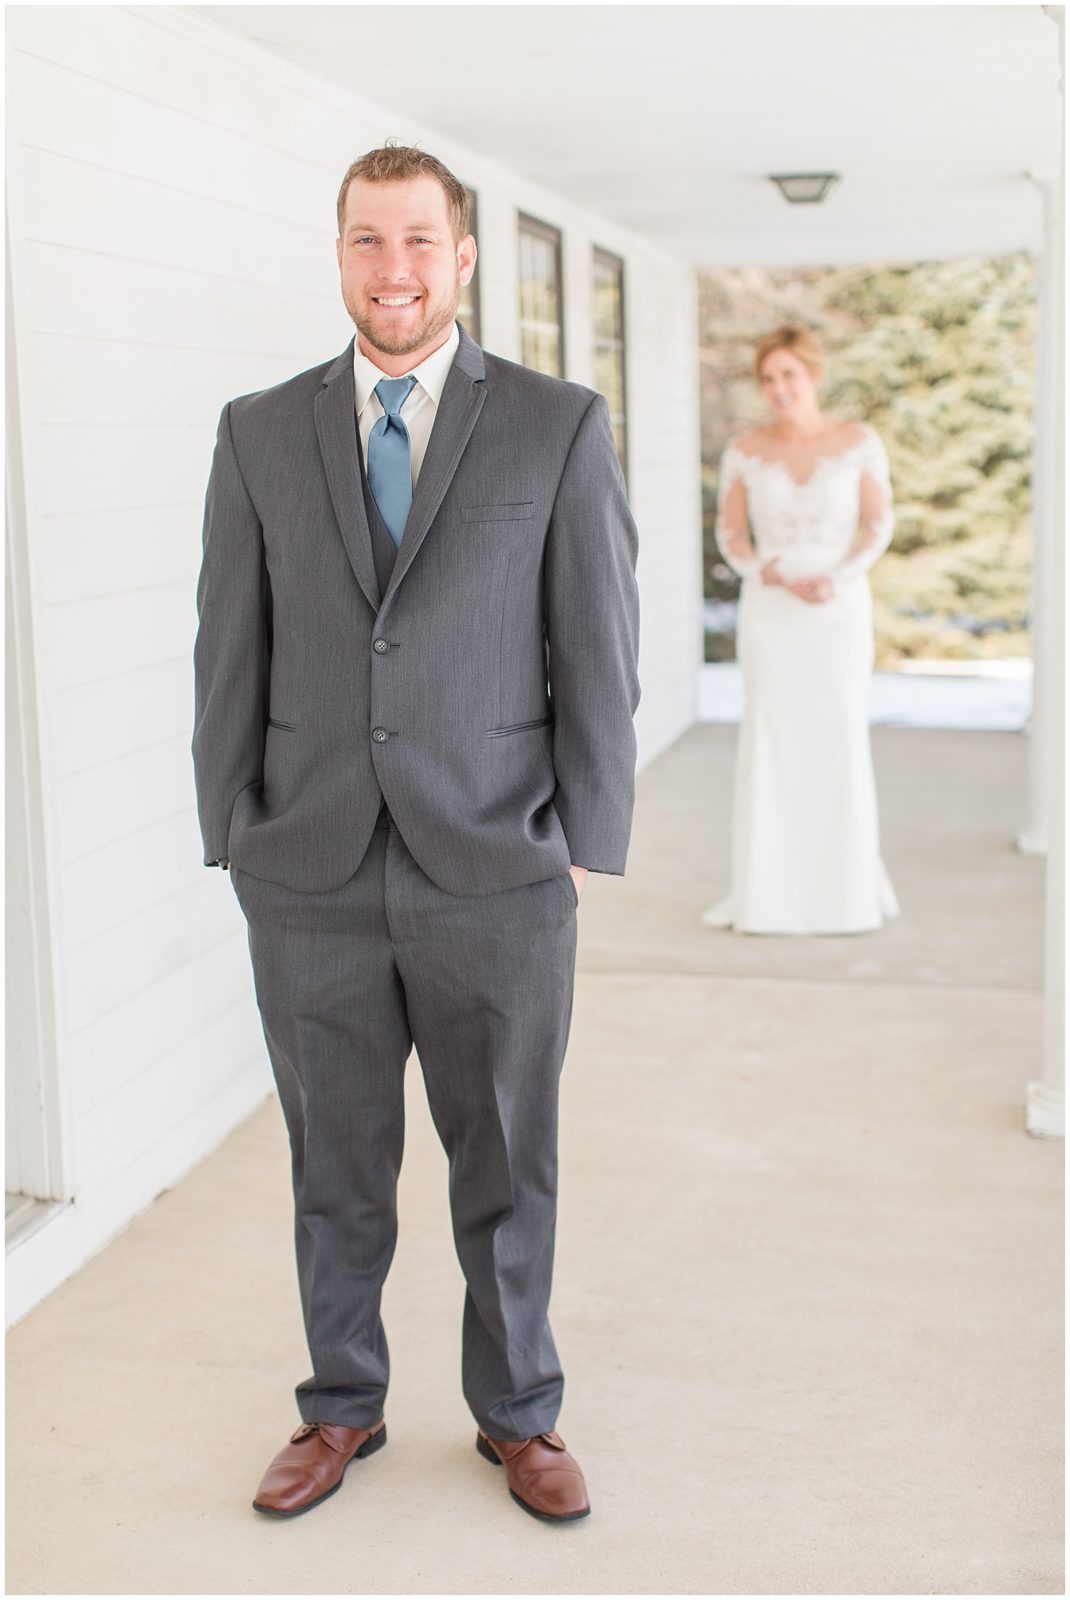 Bride and Groom Portraits, shot by Jessica Brees, photographer and videographer near Sioux City, Iowa